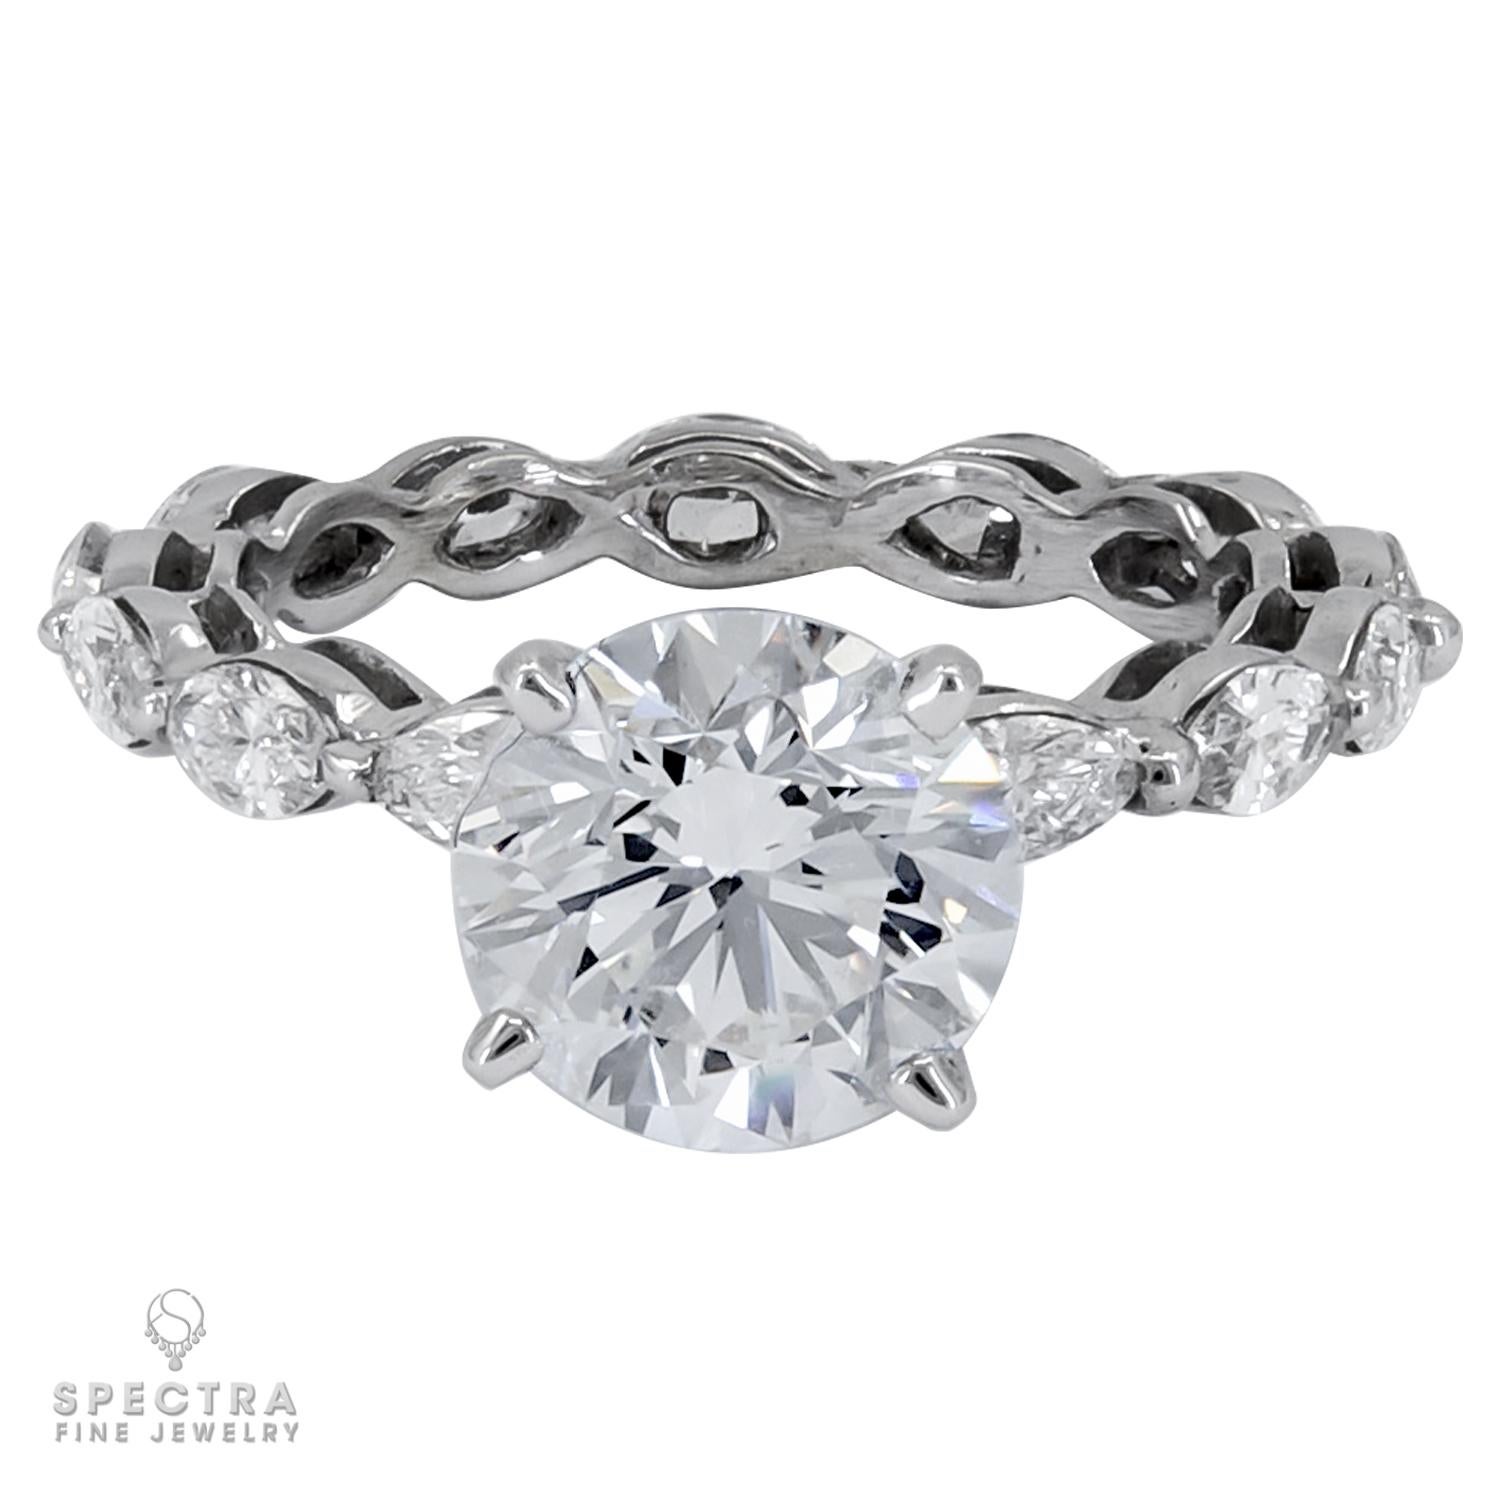 Spectra Fine Jewelry GIA Certified 2.23 Carat Diamond Engagement Ring In New Condition For Sale In New York, NY